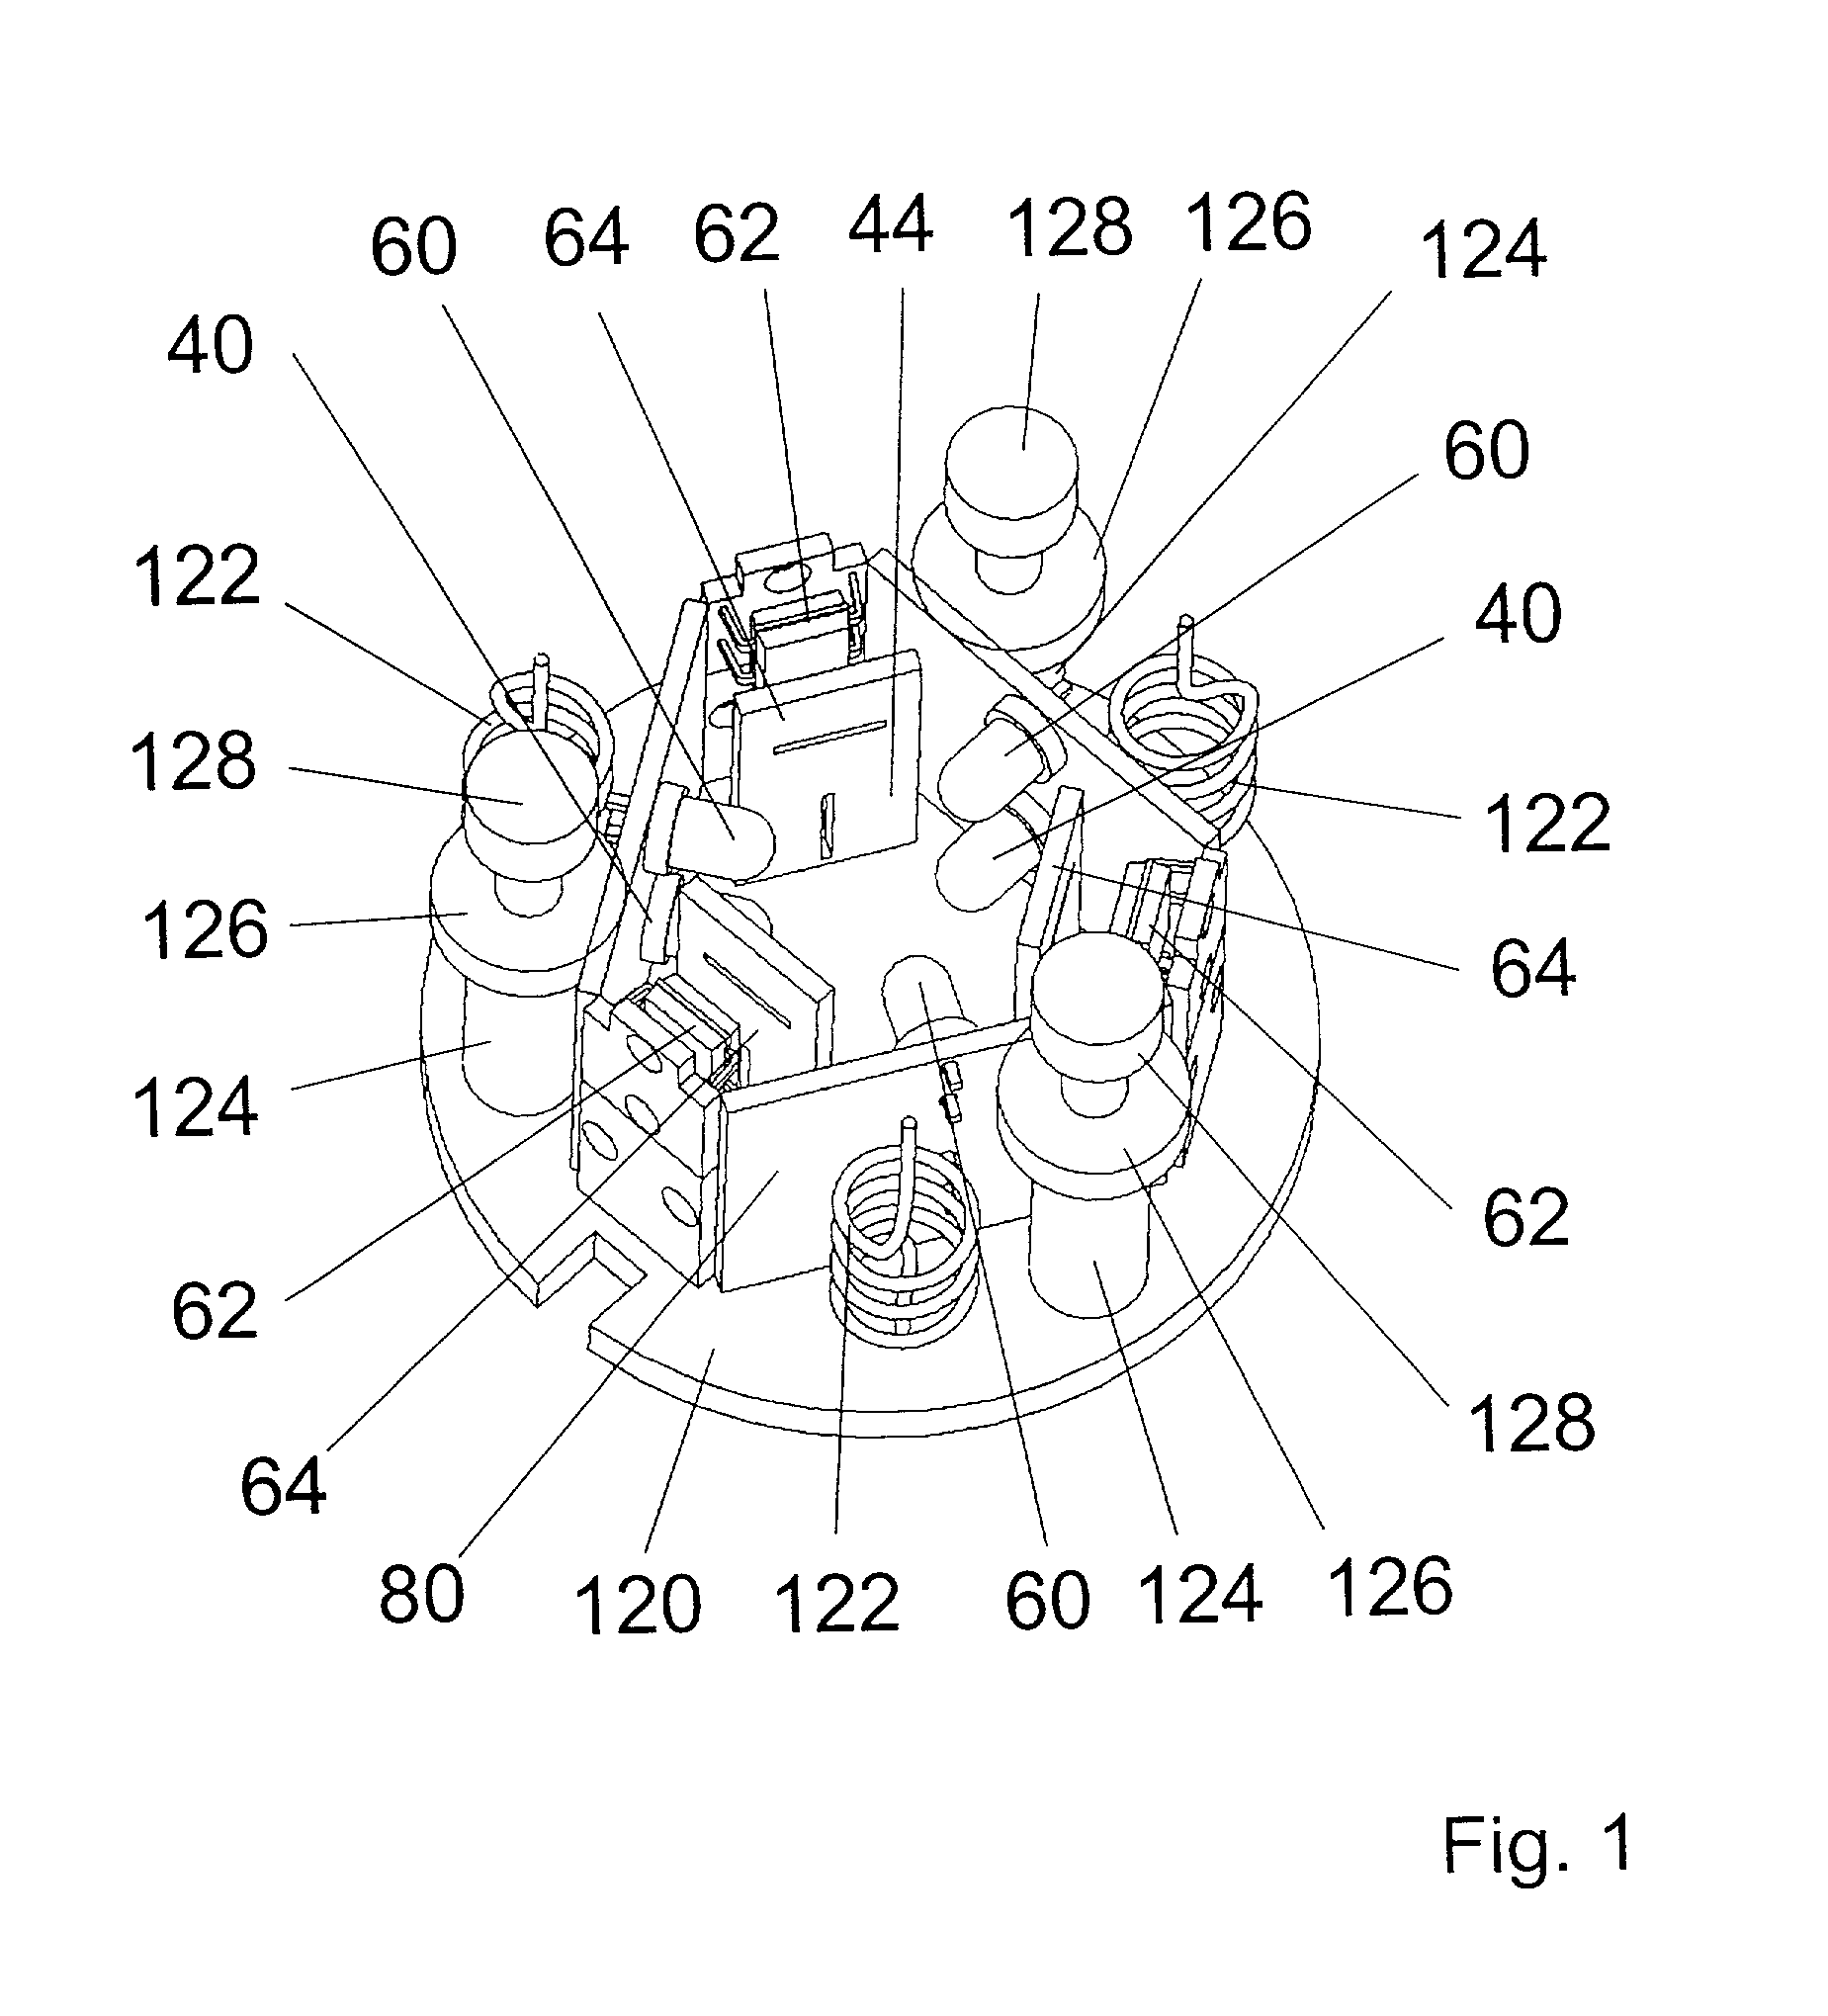 Arrangement for the detection for relative movements or relative position of two objects